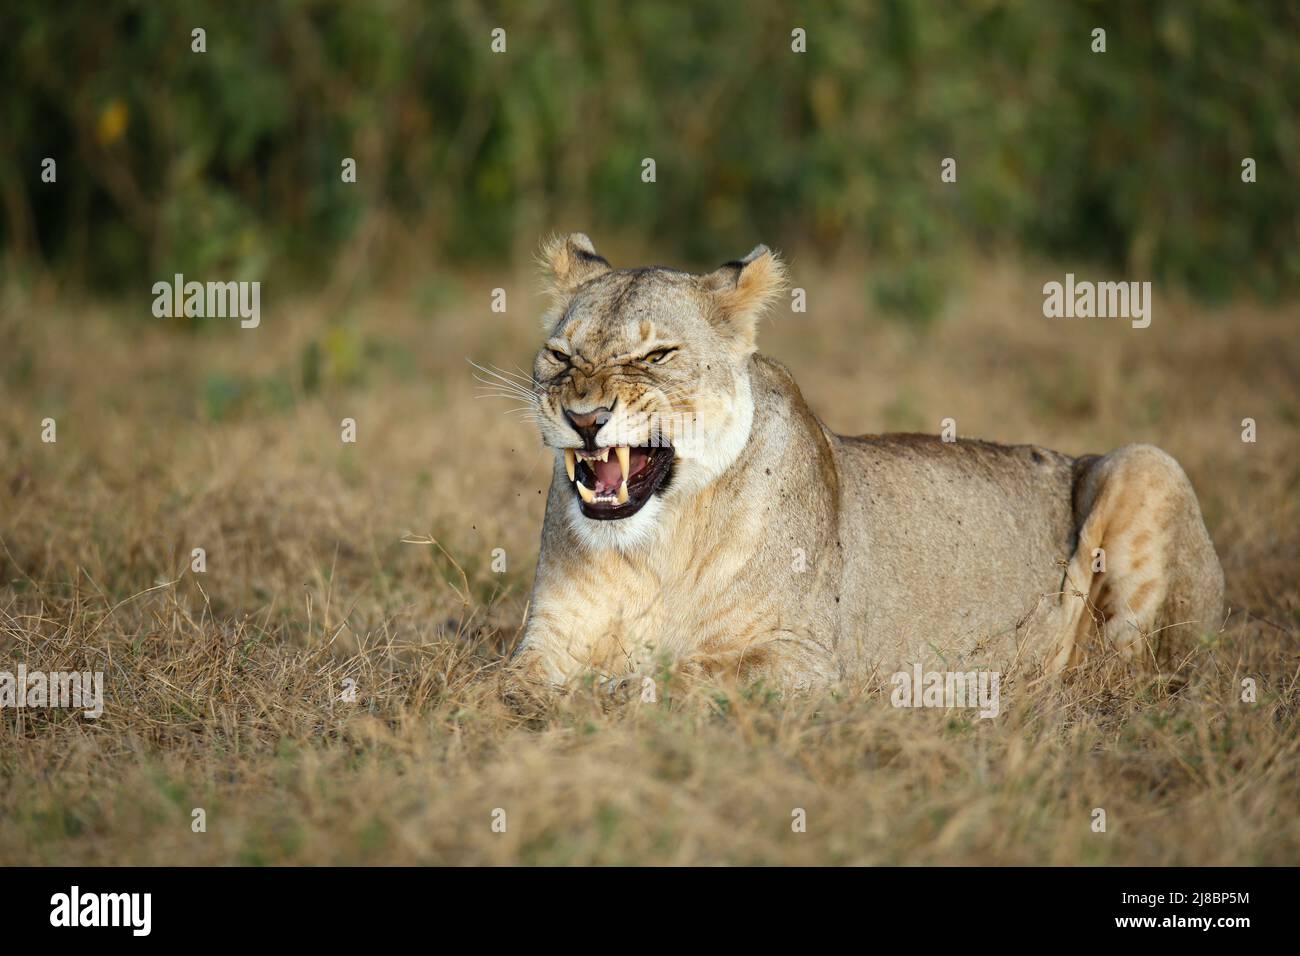 Lioness Just Ending a Yawn, with Crazy-looking Eyes. Amboseli, Kenya Stock Photo